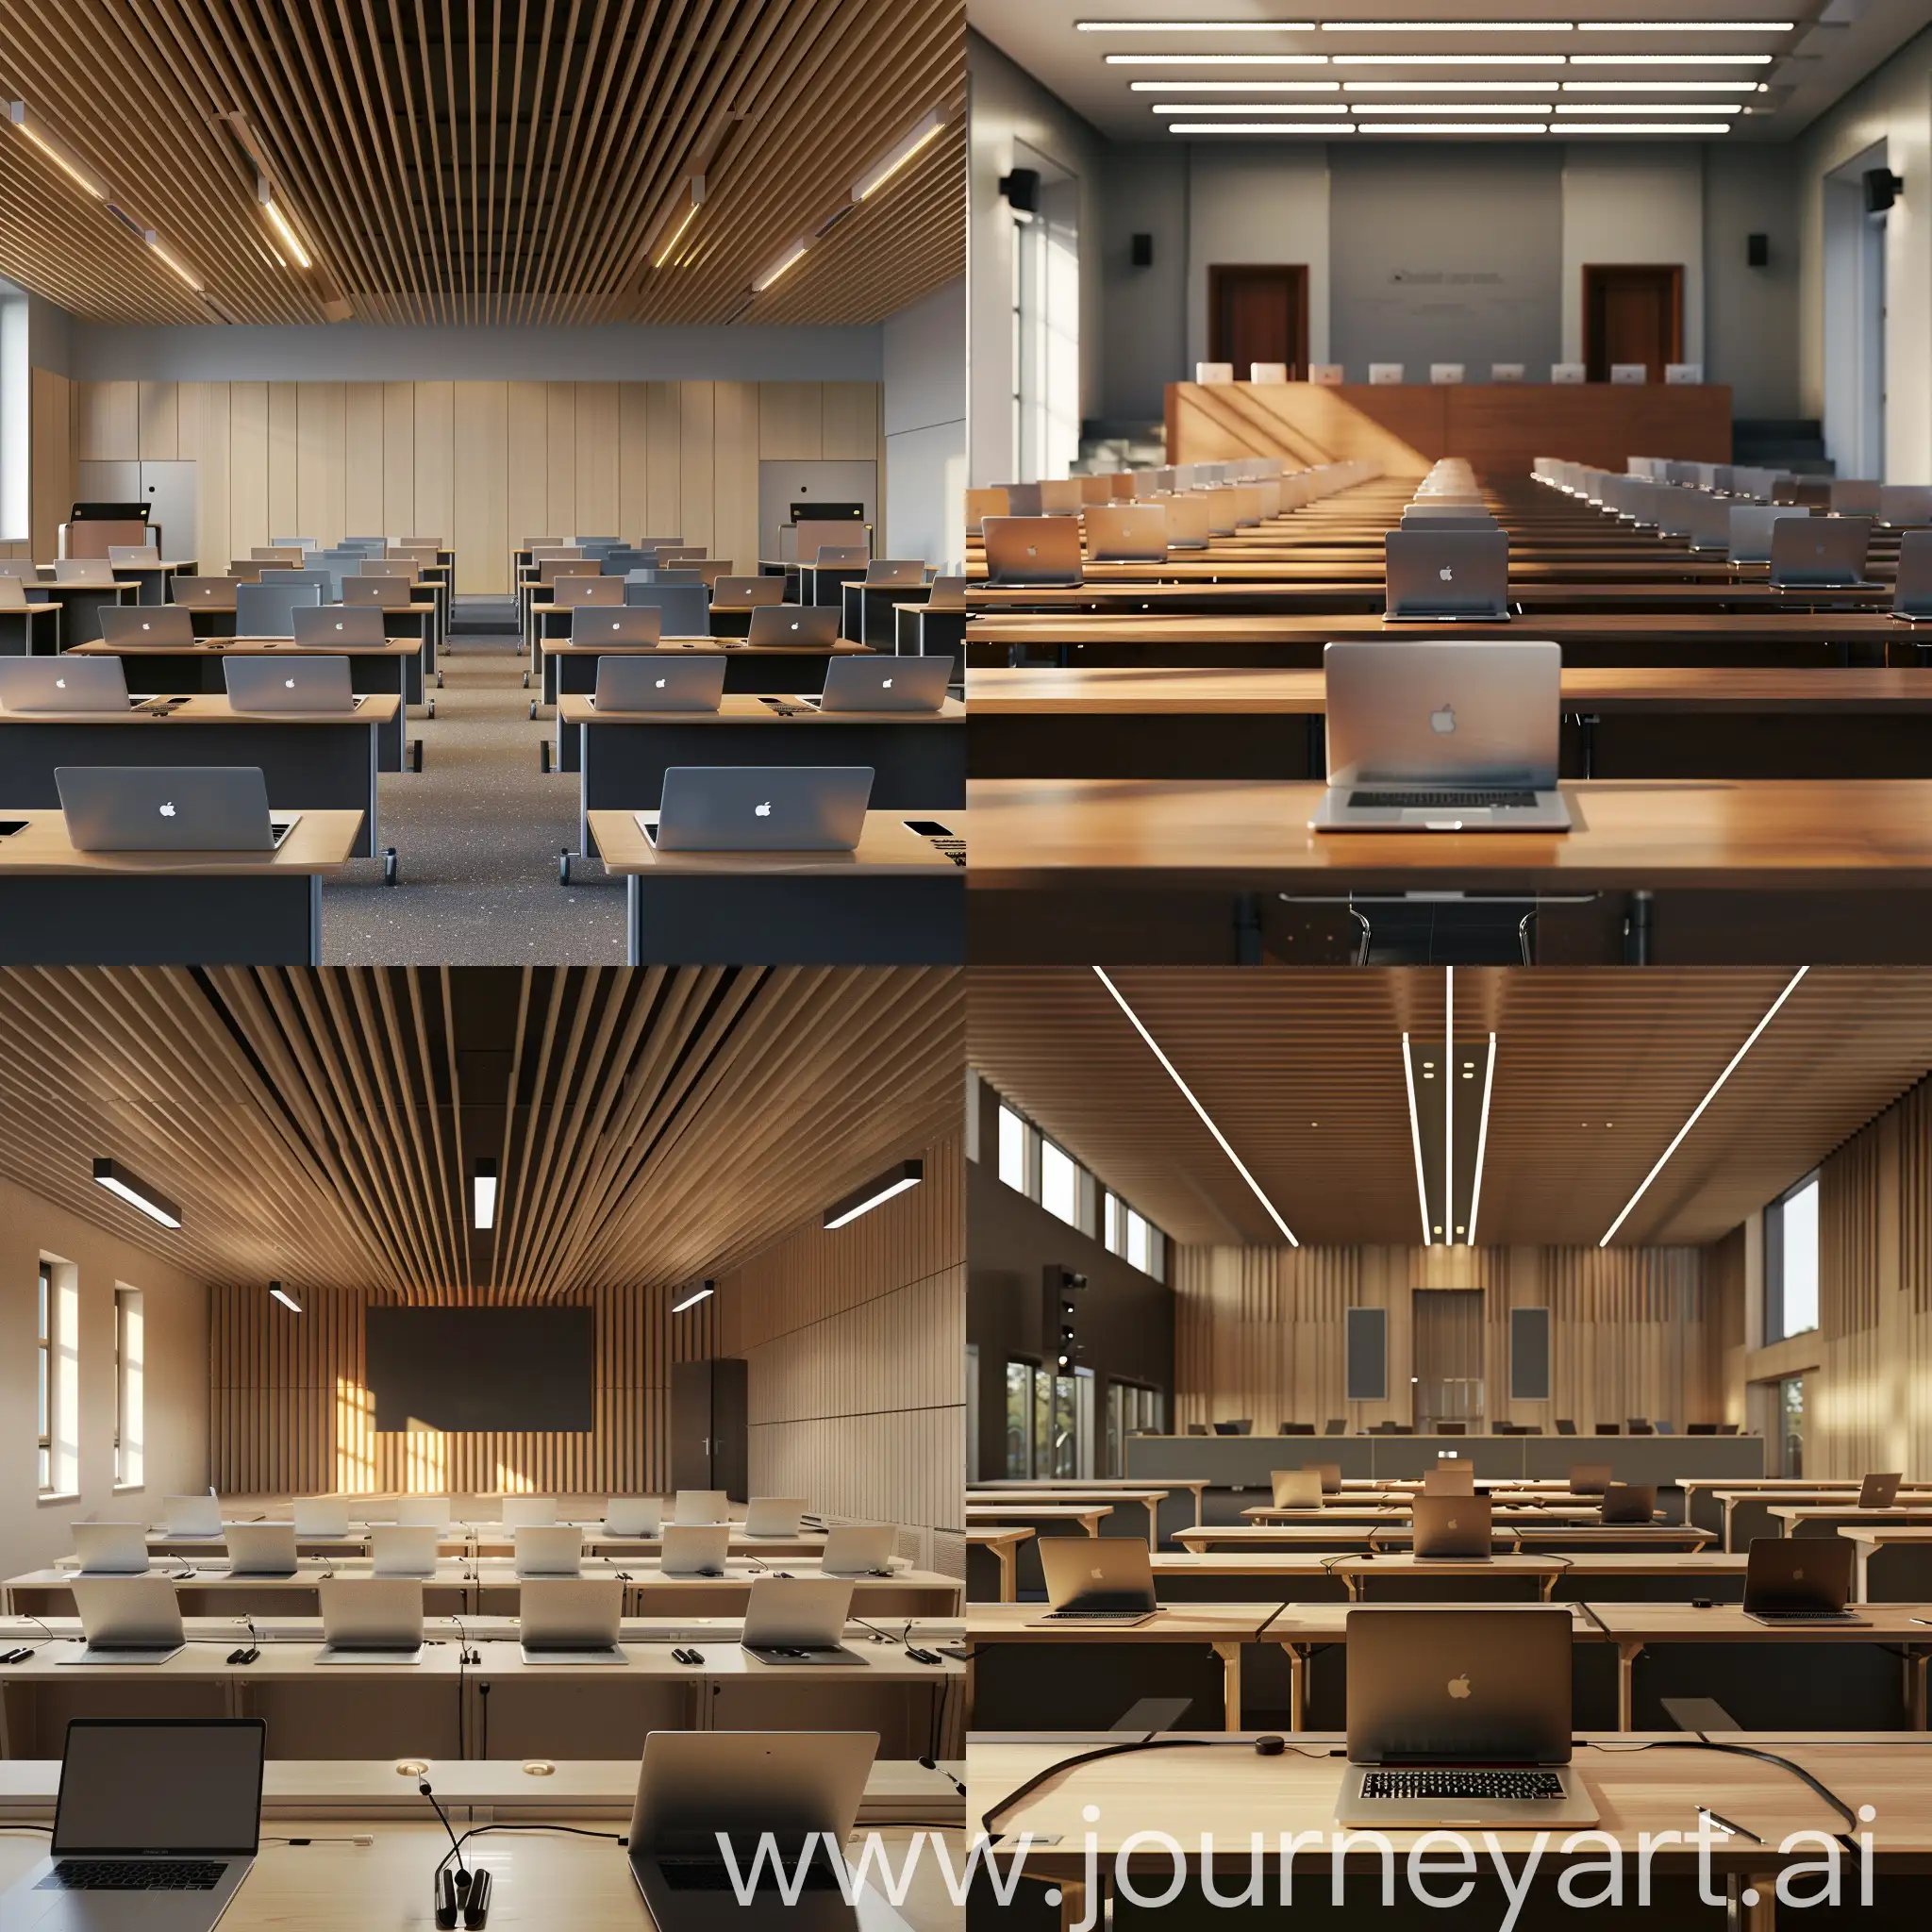 Empty-Lecture-Hall-with-Laptops-on-Tables